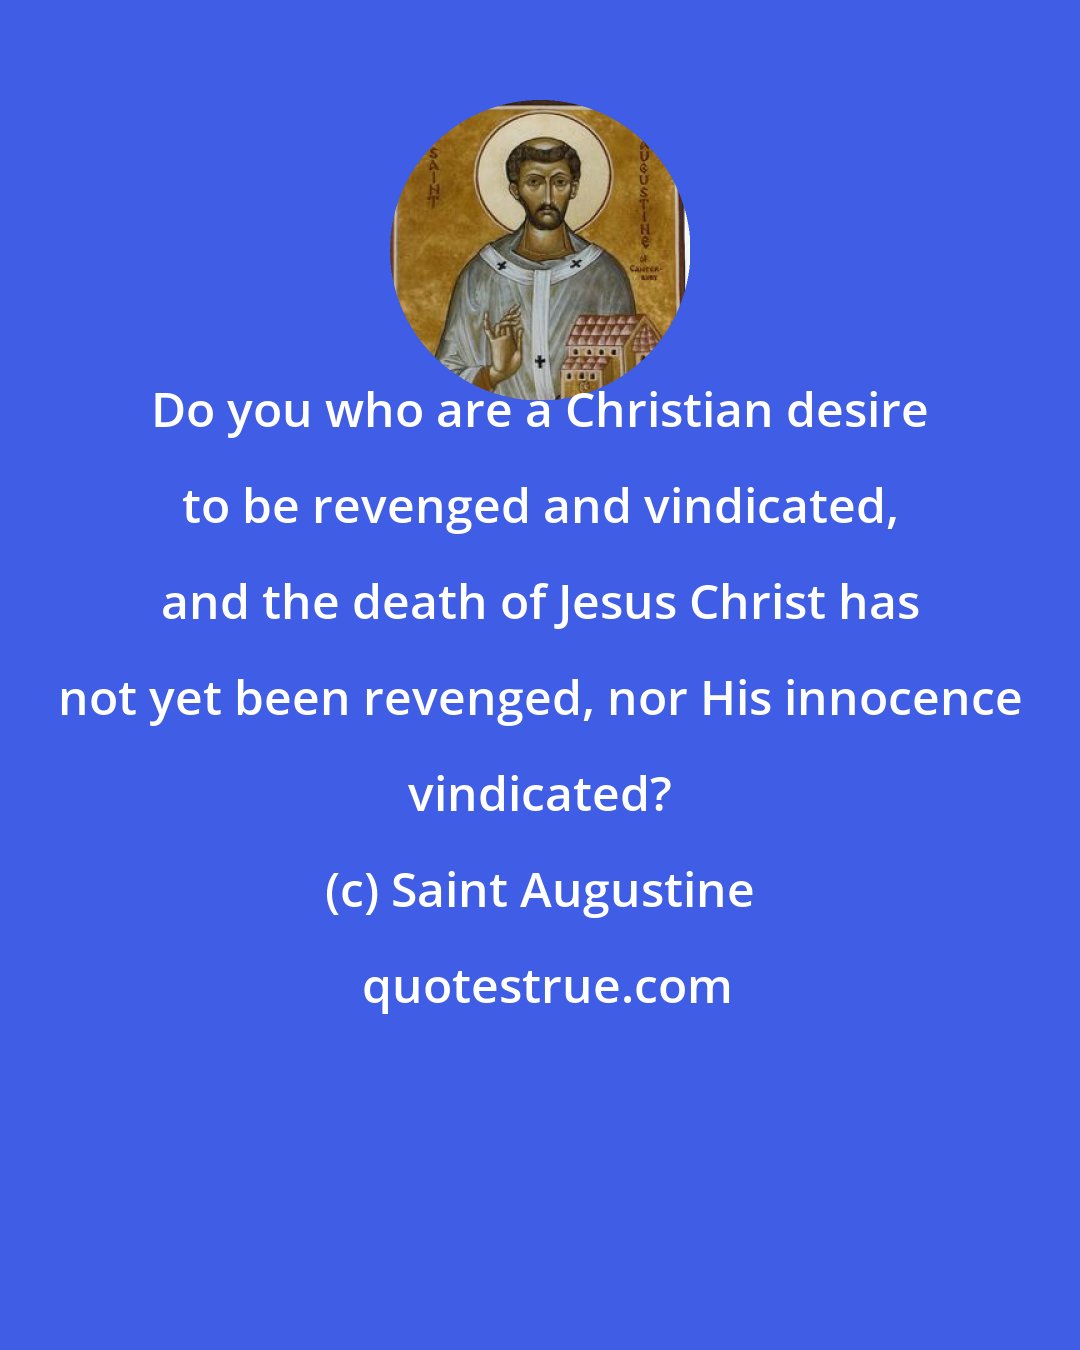 Saint Augustine: Do you who are a Christian desire to be revenged and vindicated, and the death of Jesus Christ has not yet been revenged, nor His innocence vindicated?